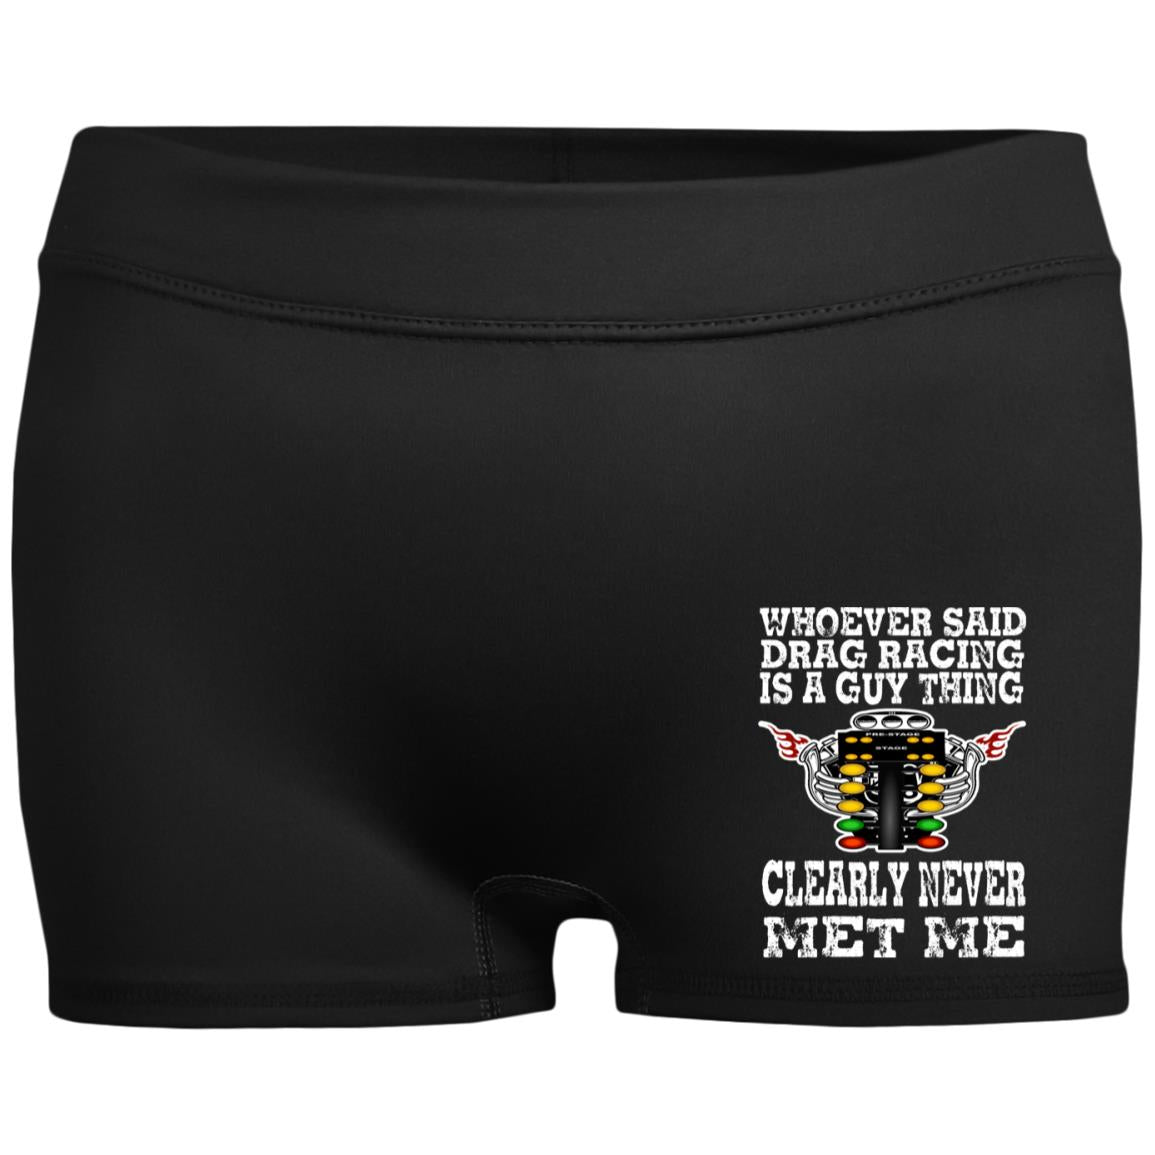 Whoever Said Drag Racing Is A Guy Thing Ladies' Fitted Moisture-Wicking 2.5 inch Inseam Shorts